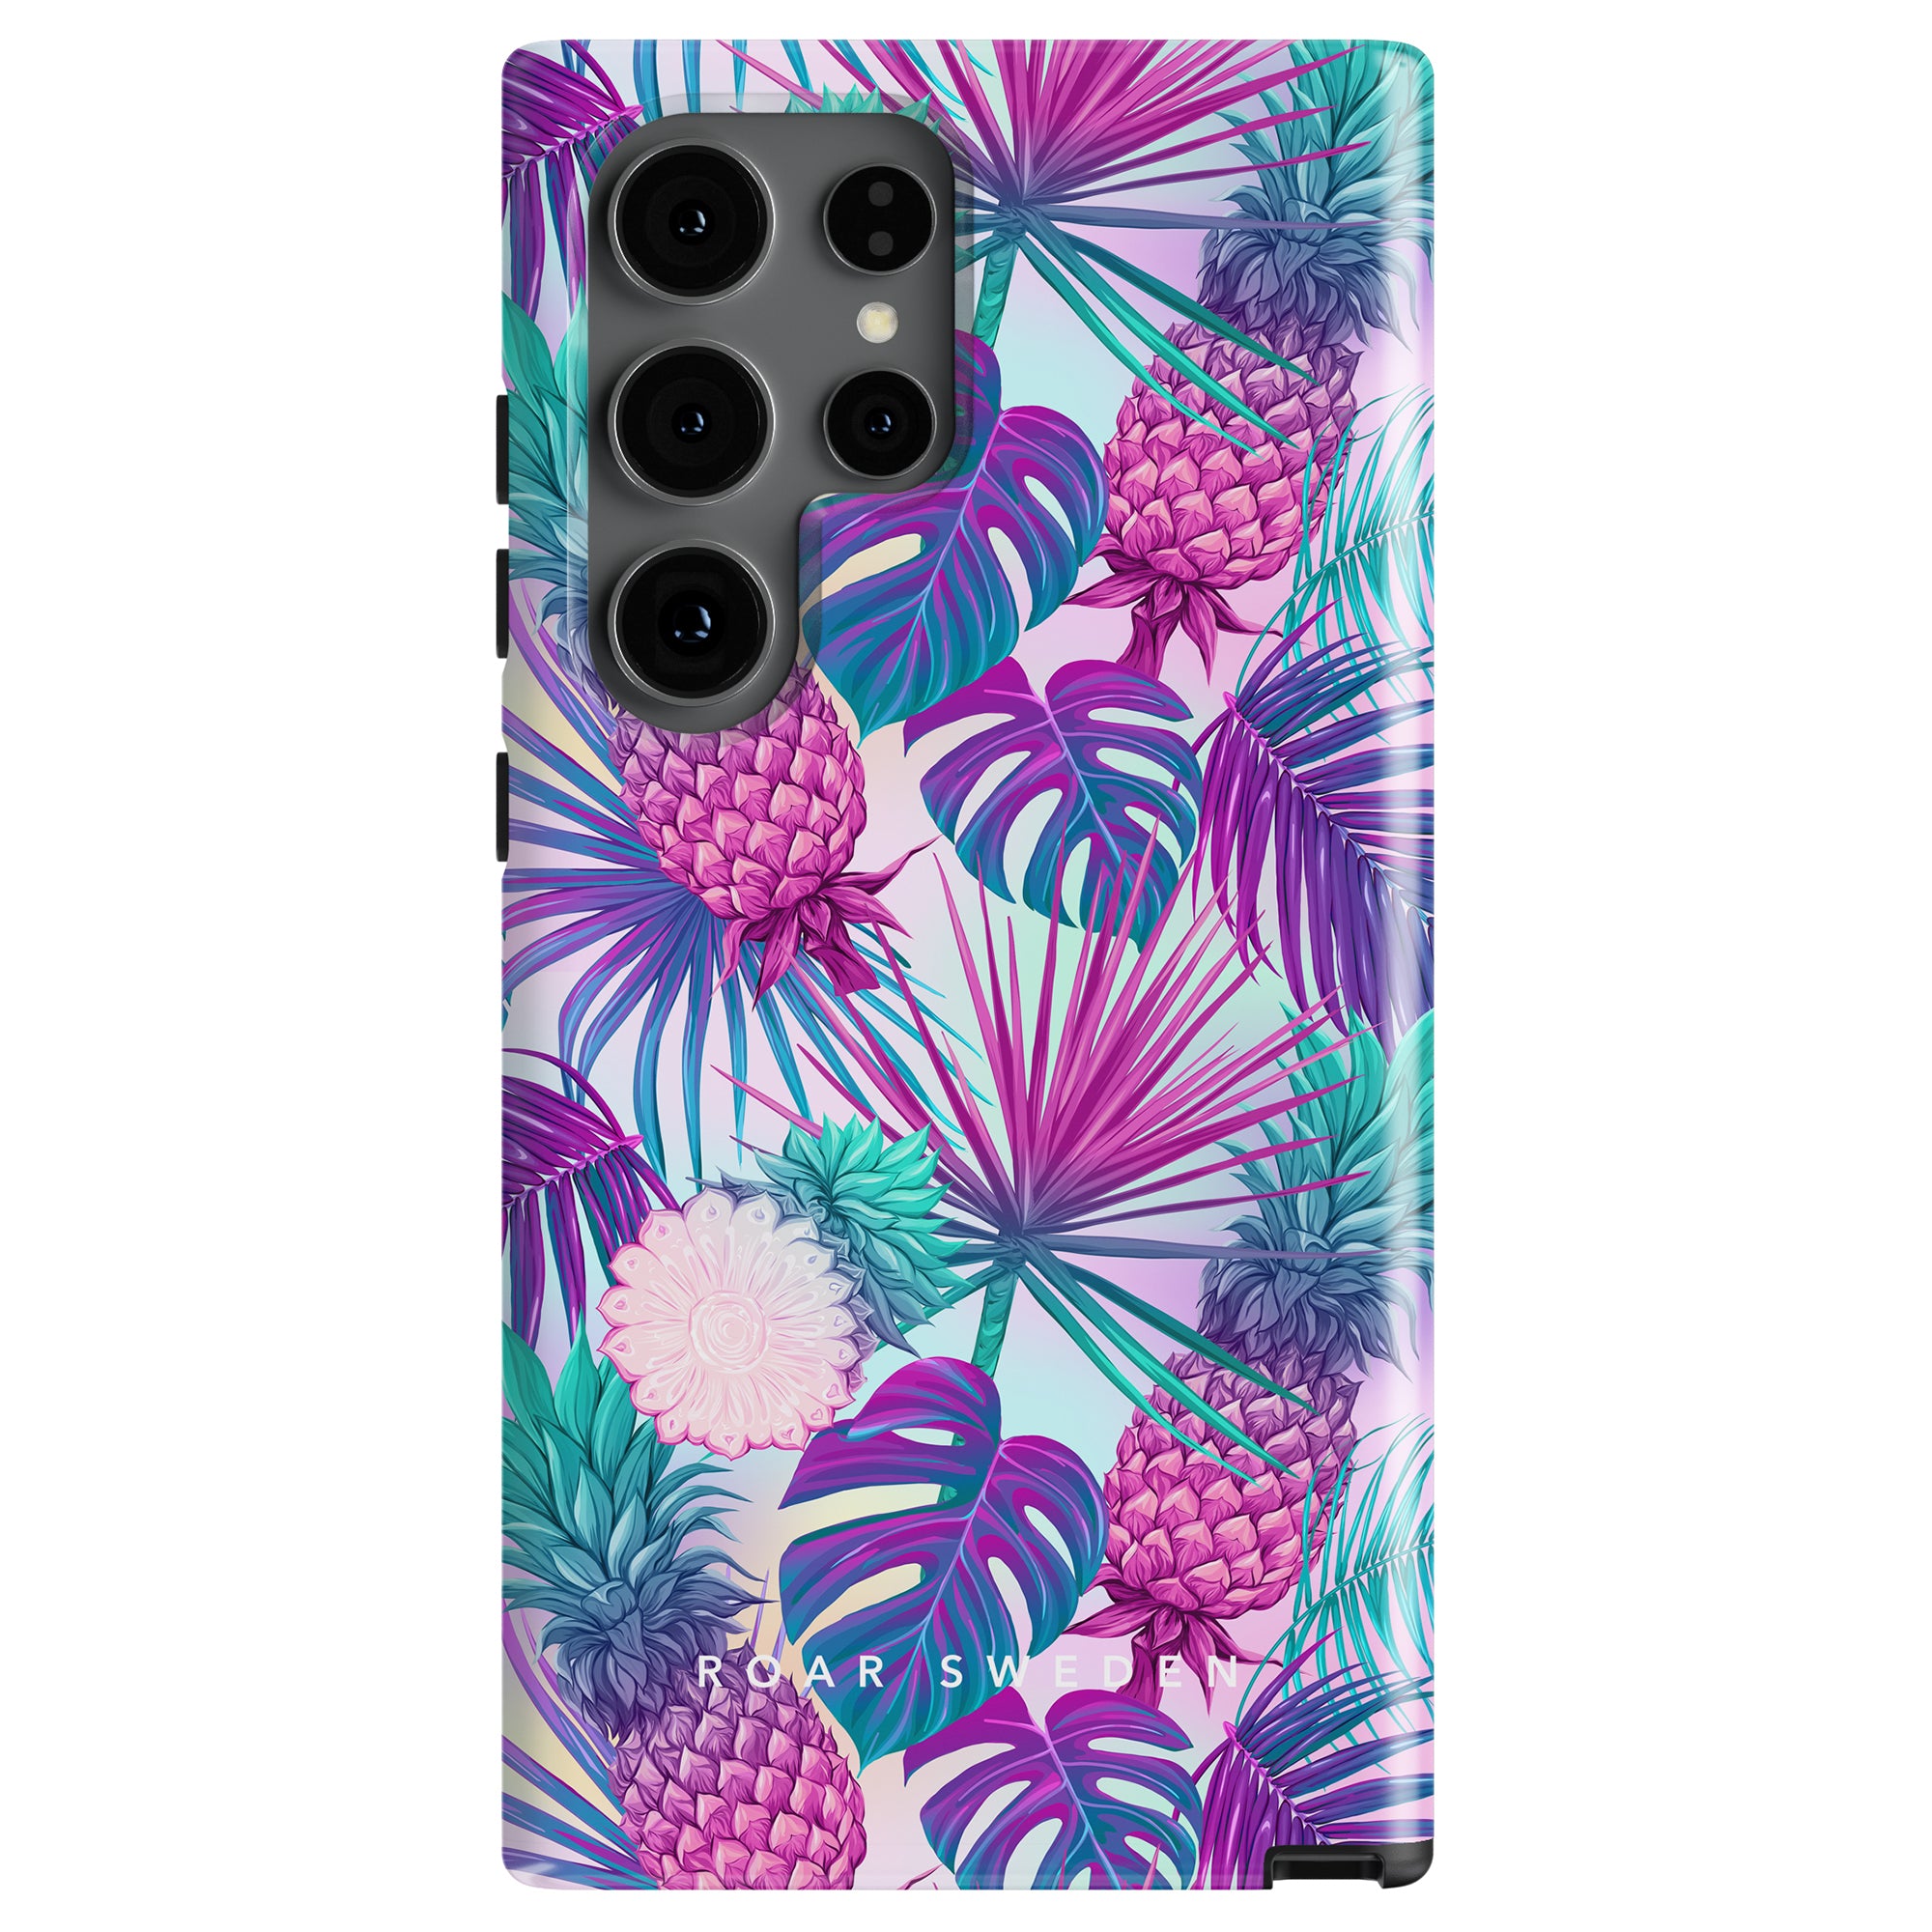 Introducing the Pineapple Party - Tough case: a smartphone case with a colorful tropical design, featuring pink and purple pineapples, and blue and green palm leaves. Perfect for a tropisk fest, this case is crafted from hållbart material skydd ensuring both style and durability.